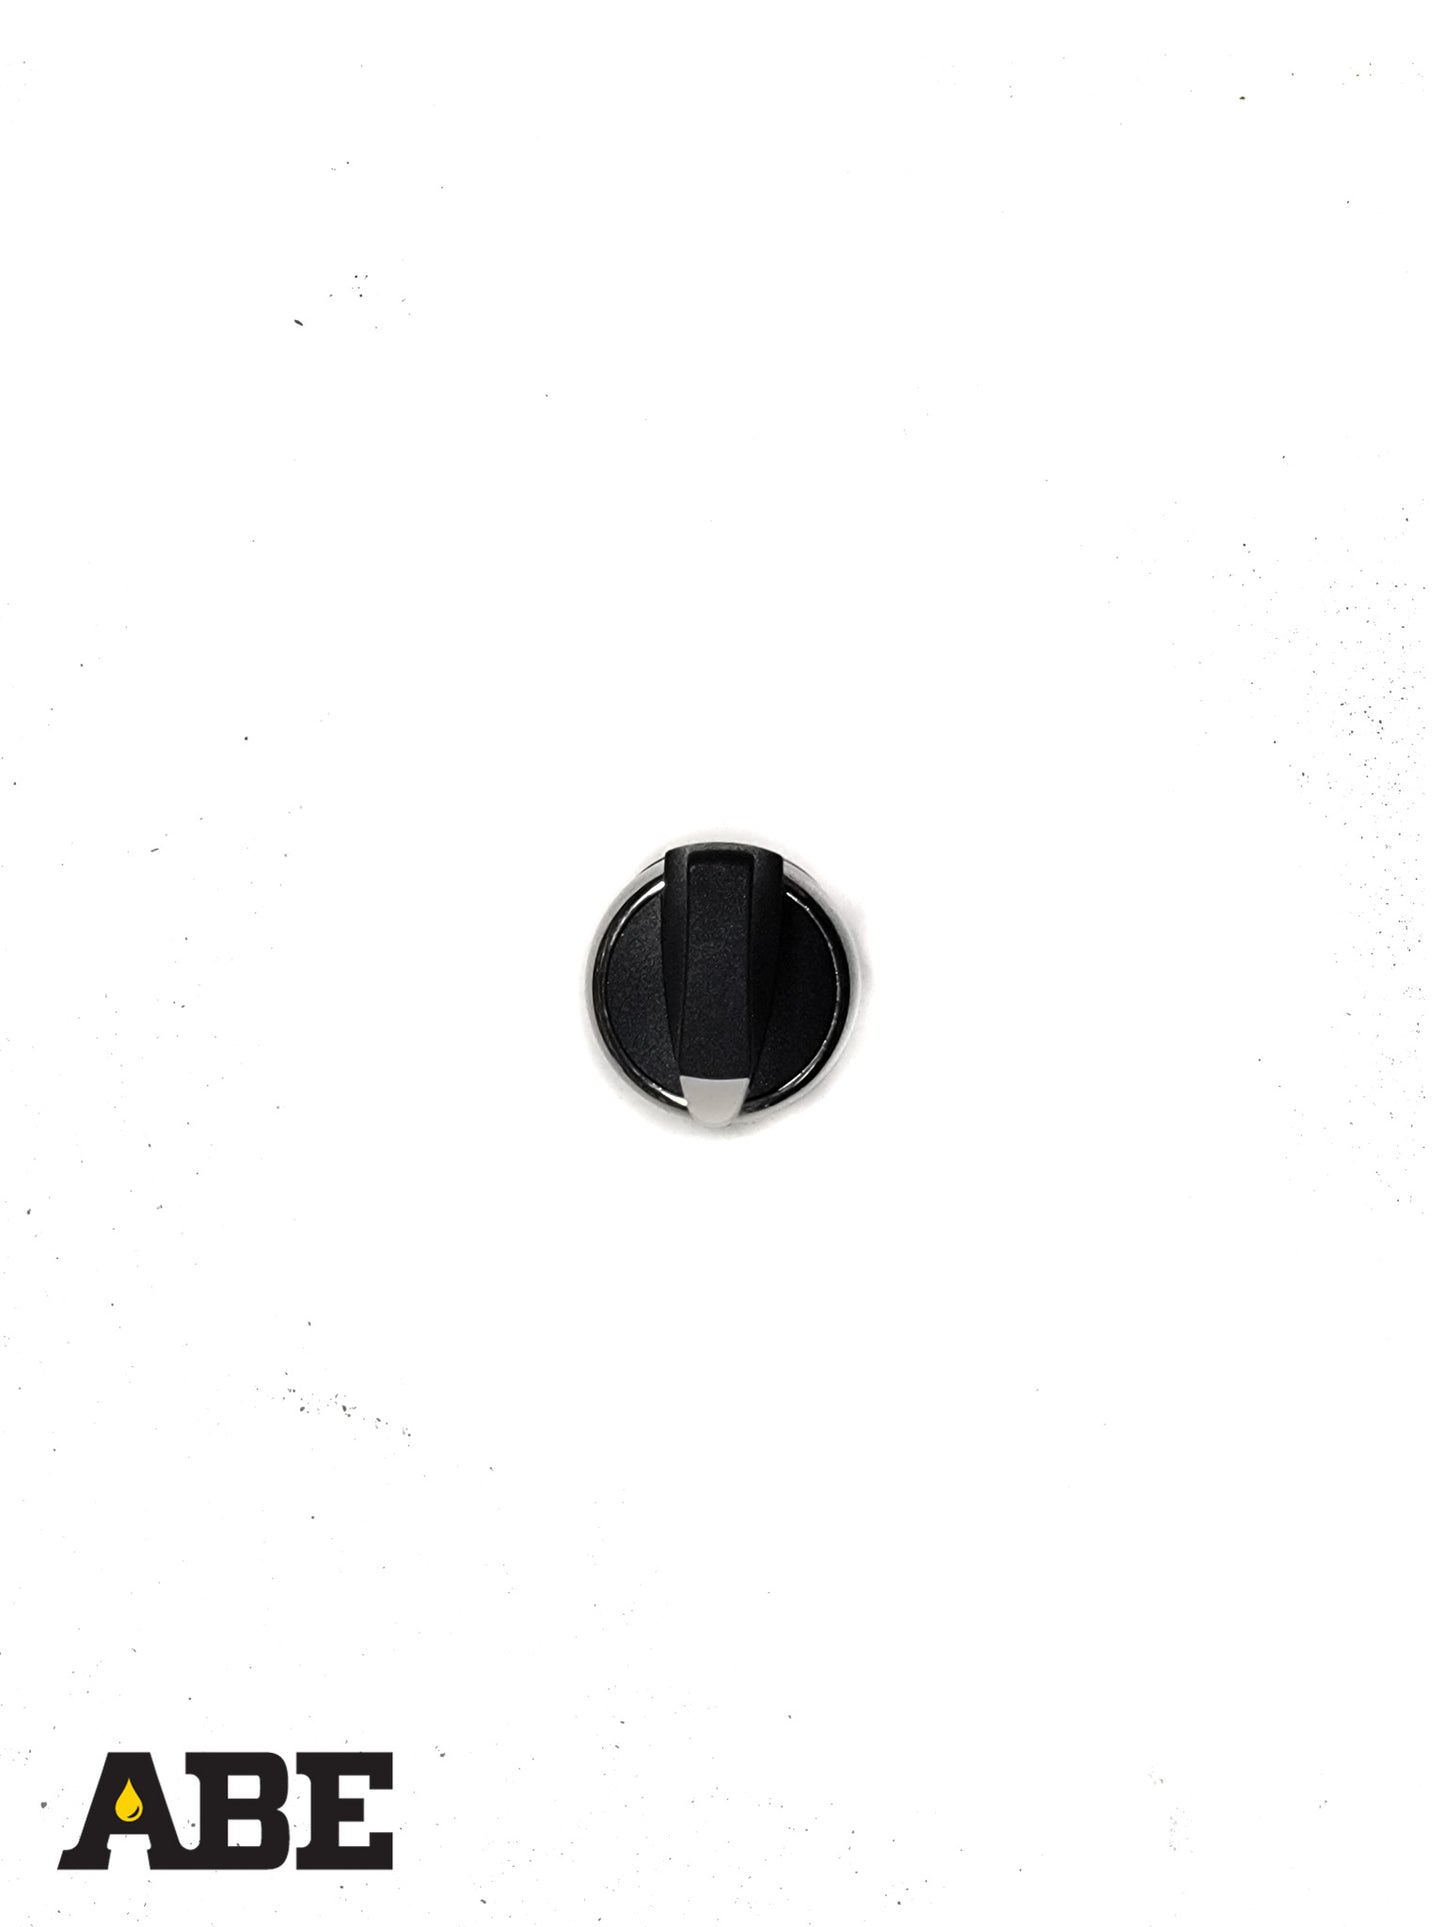 22mm 3 Position Selector Switch